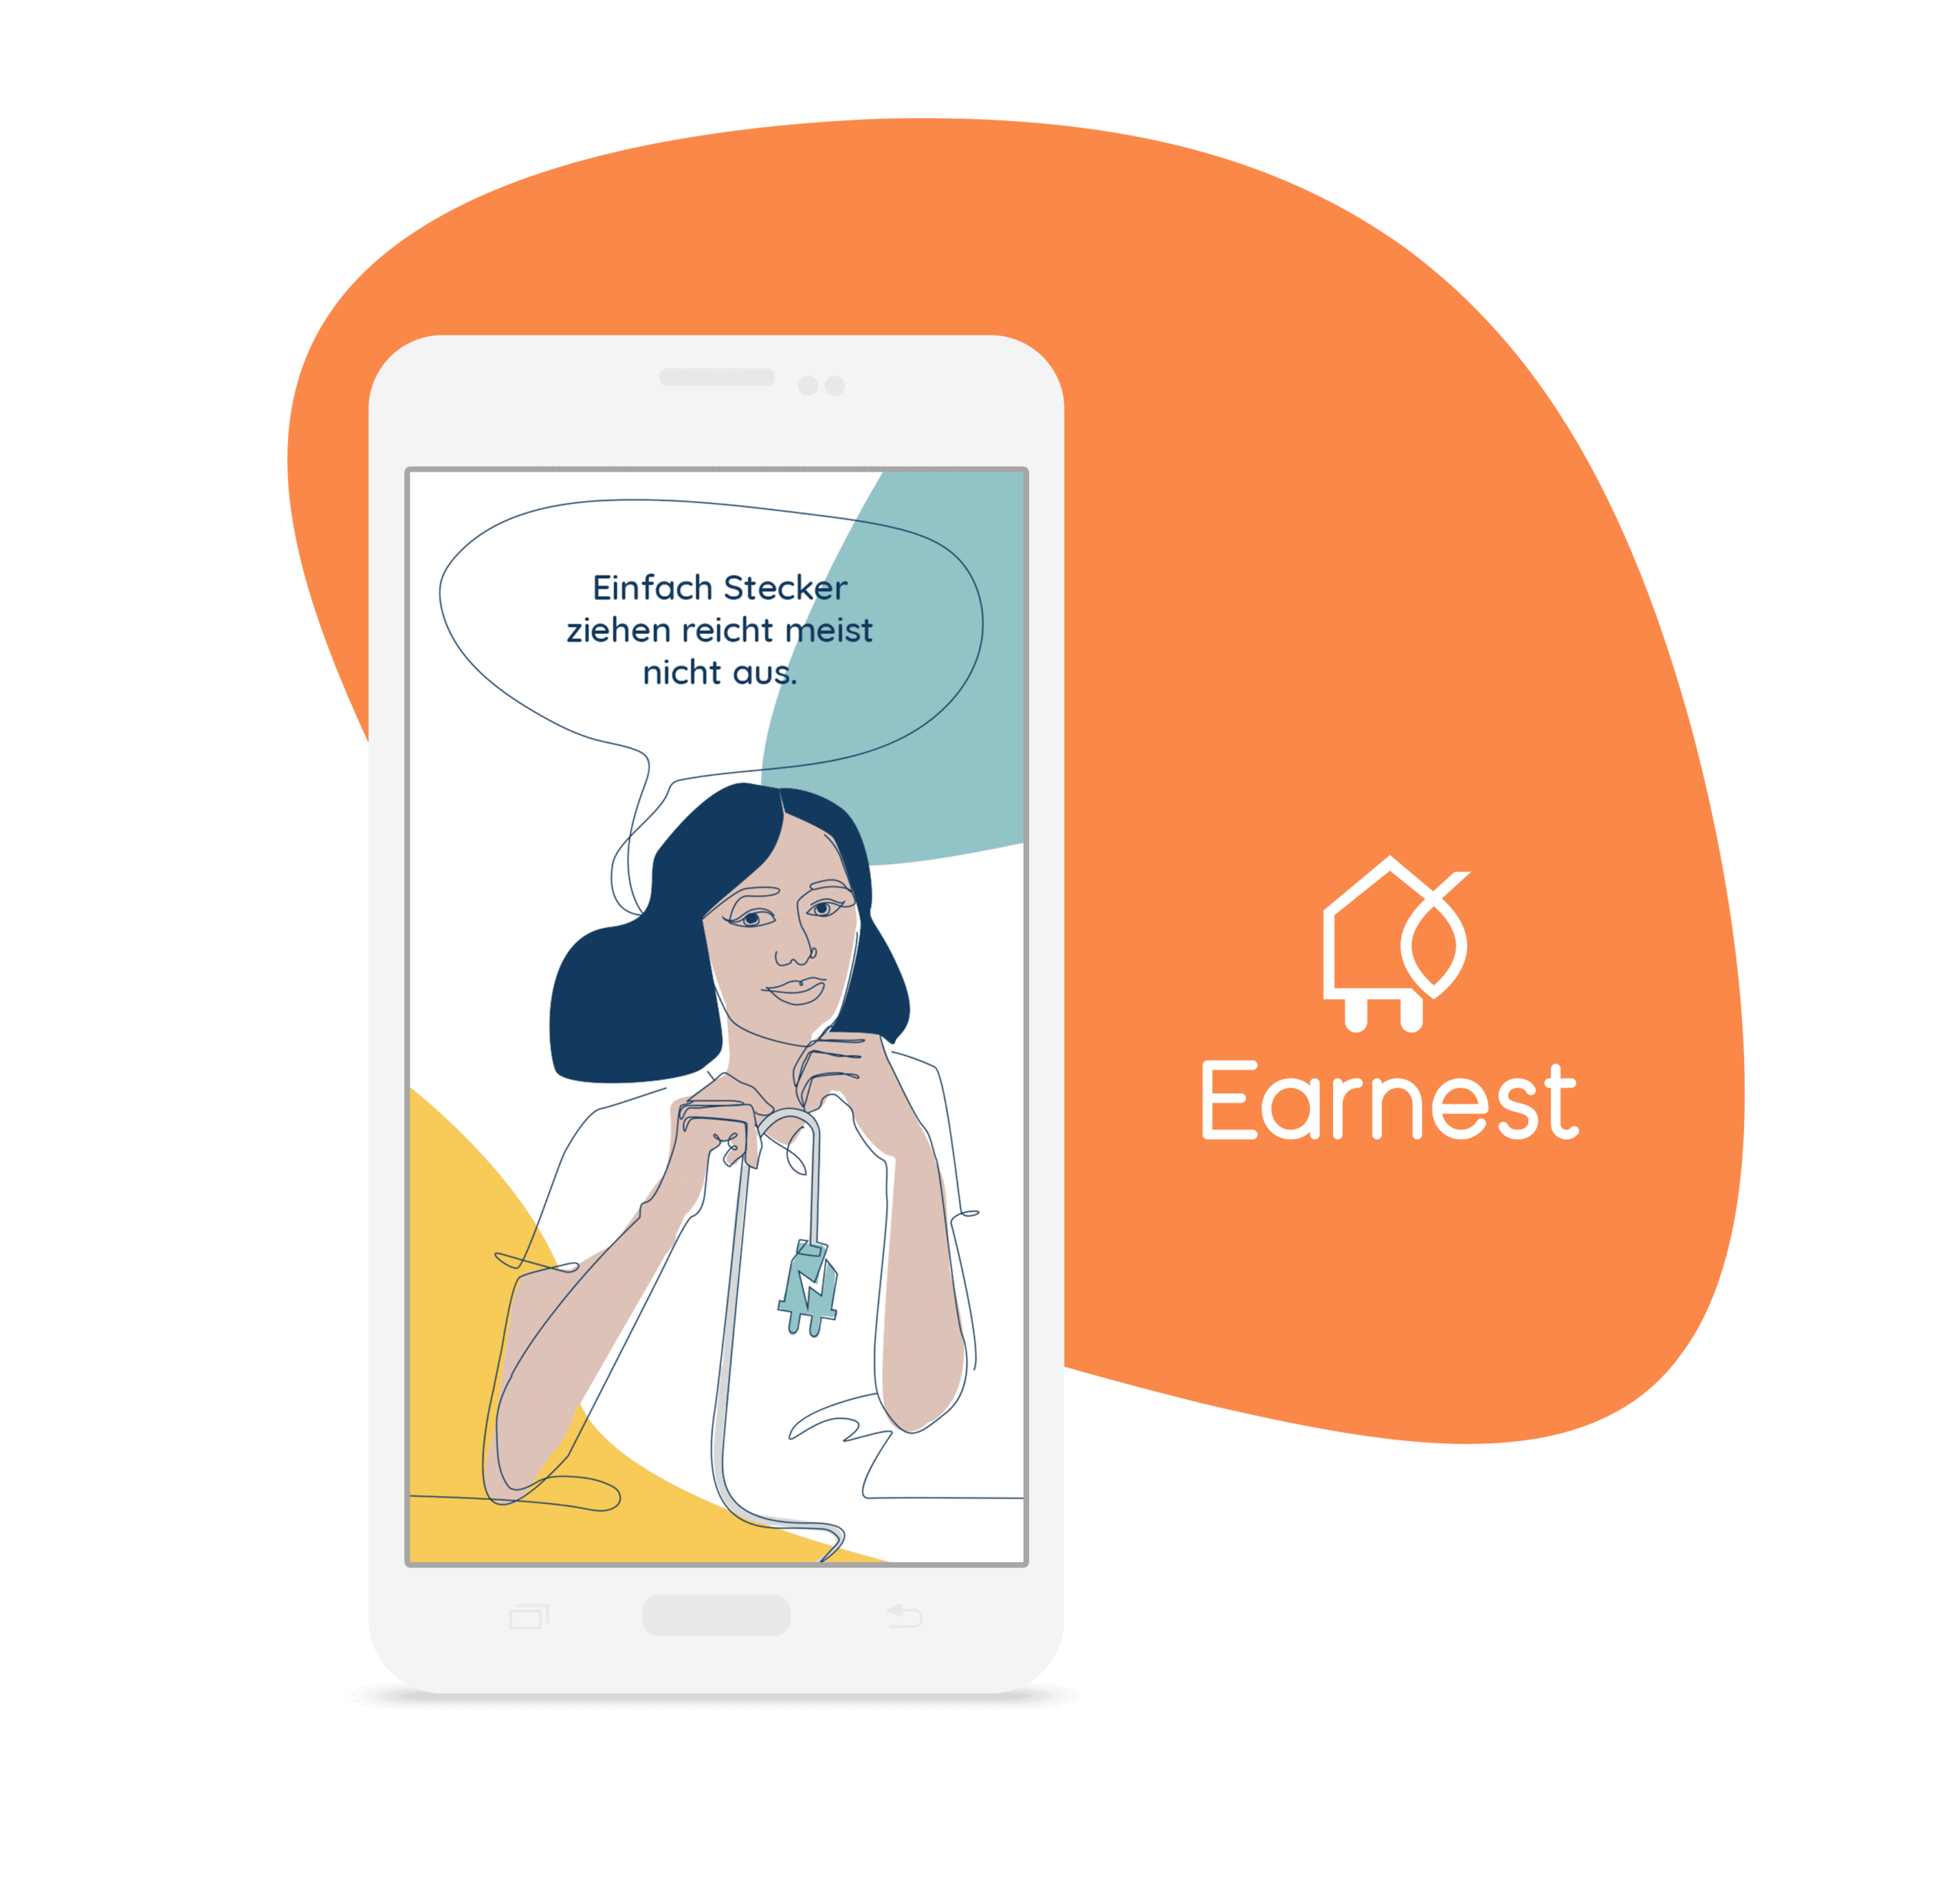 Earnest – Corporate Identity for sustainable APP